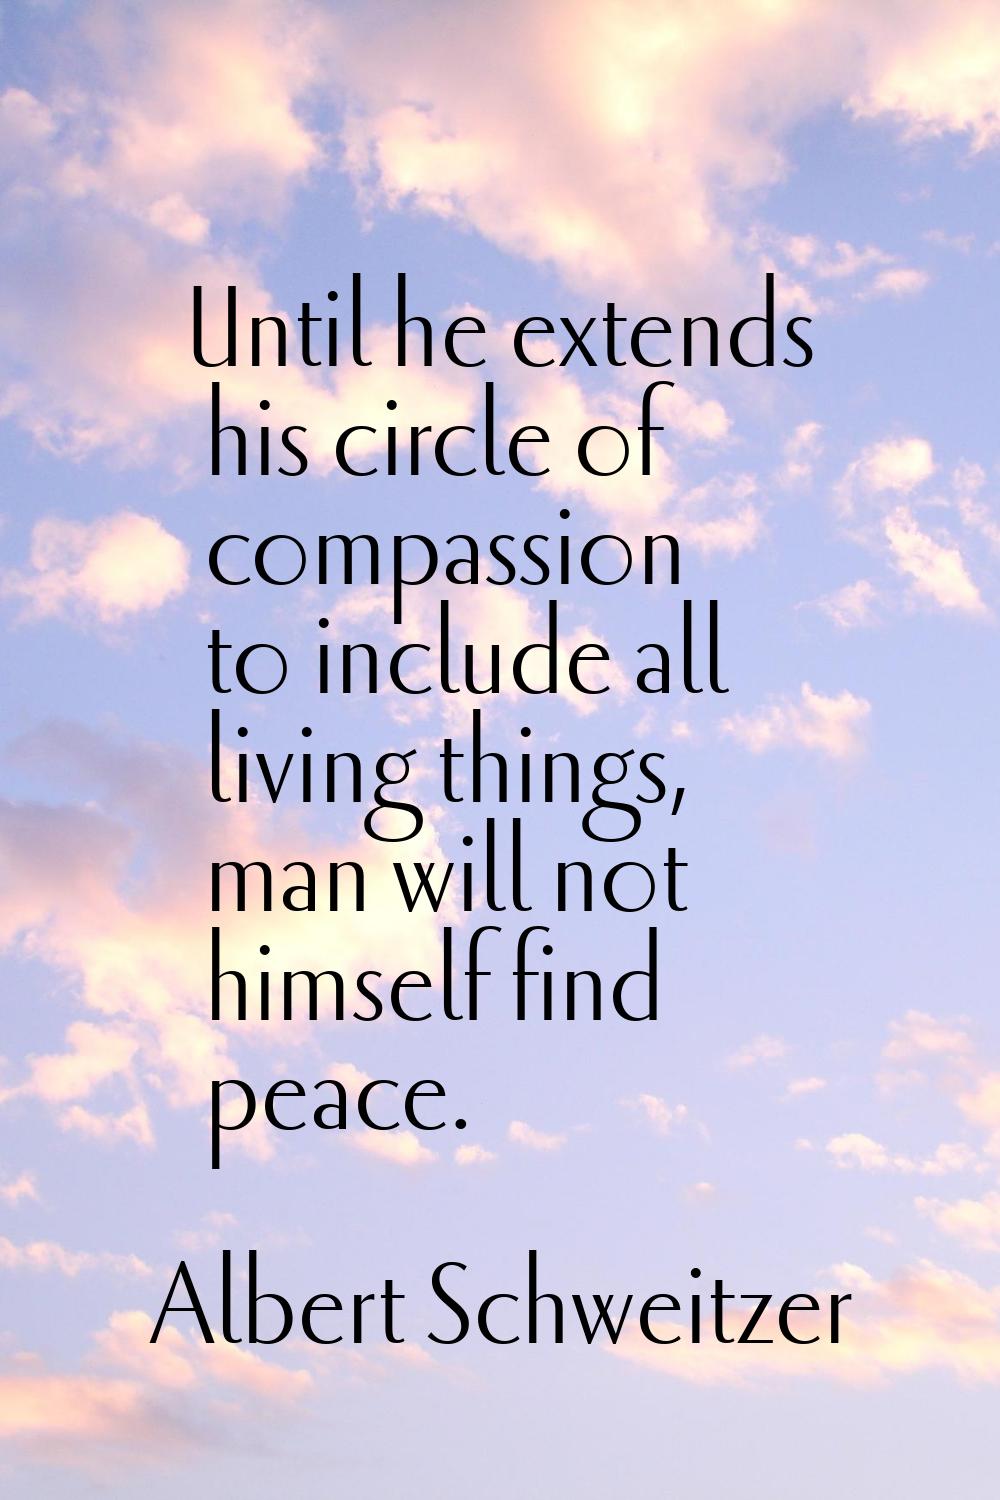 Until he extends his circle of compassion to include all living things, man will not himself find p